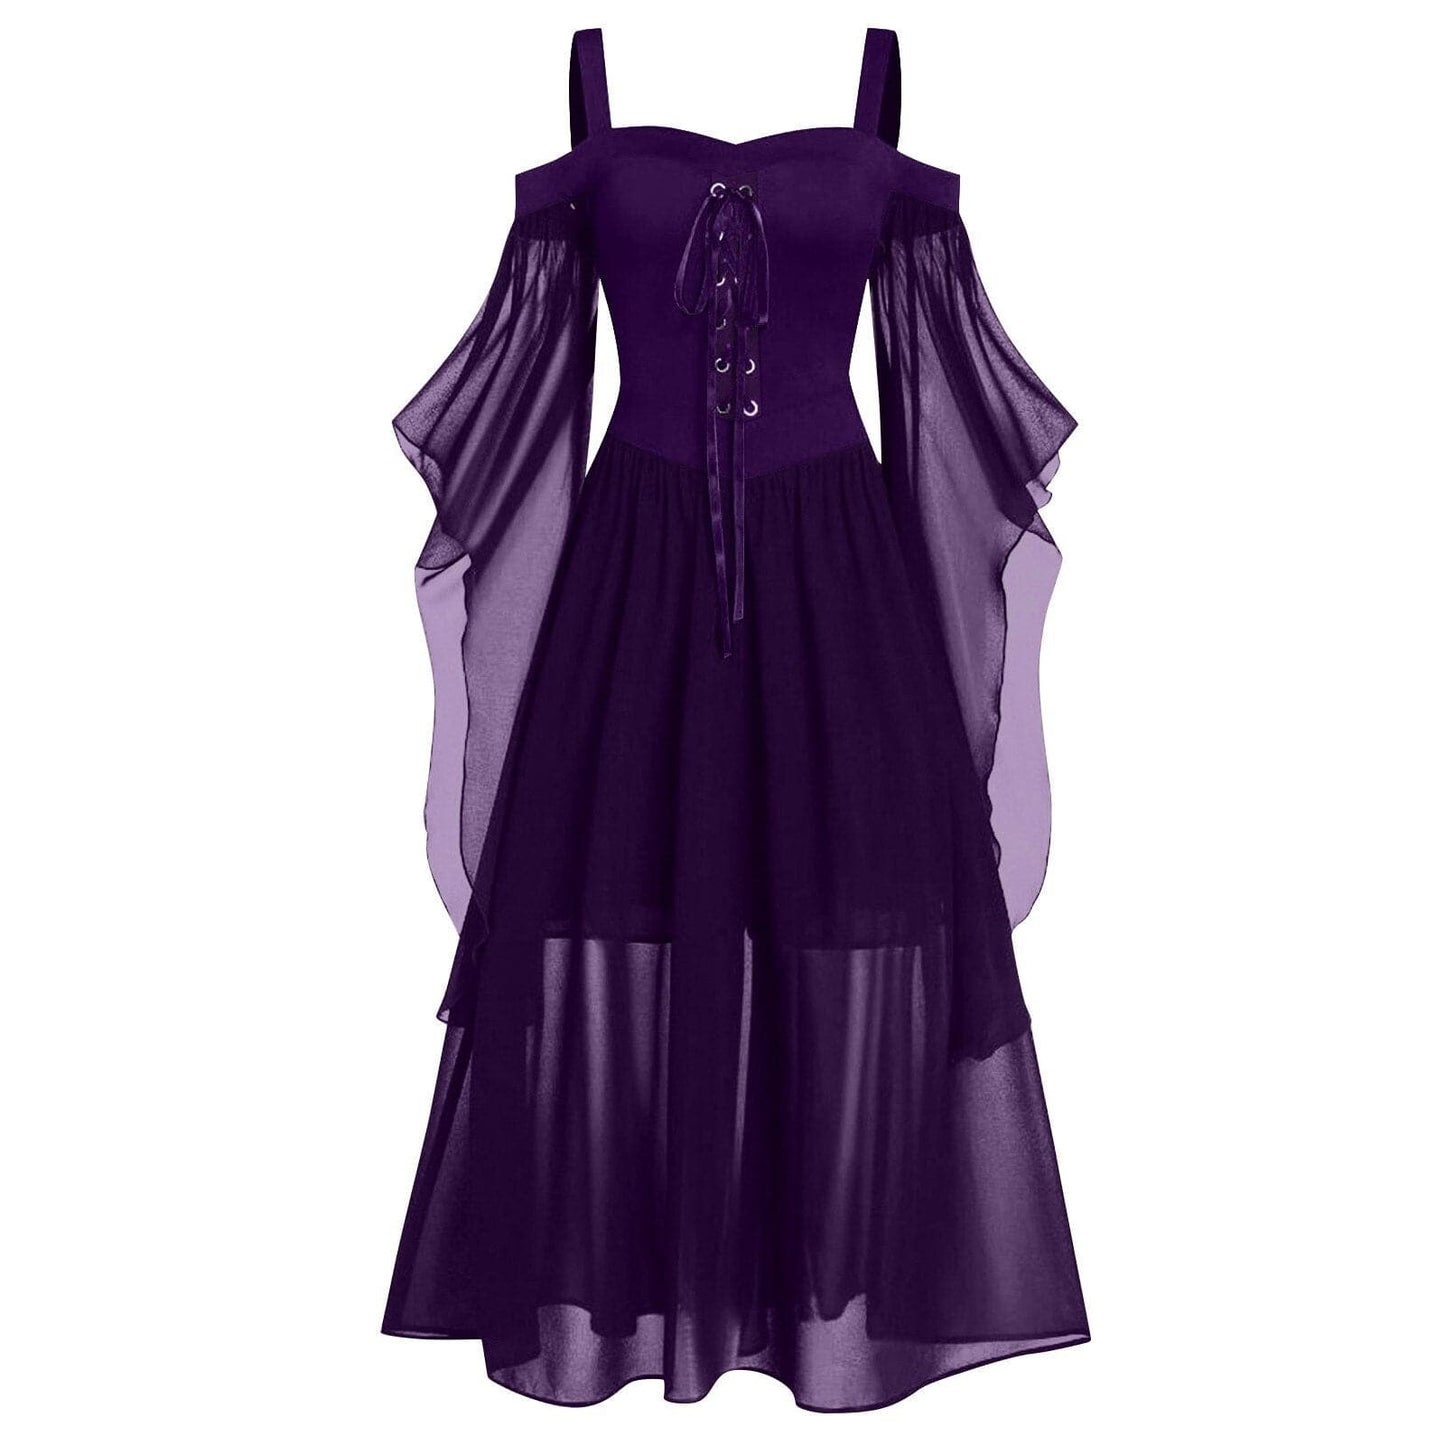 Gothic Medieval Dress - Cold Shoulder Butterfly Sleeve Halloween Costume